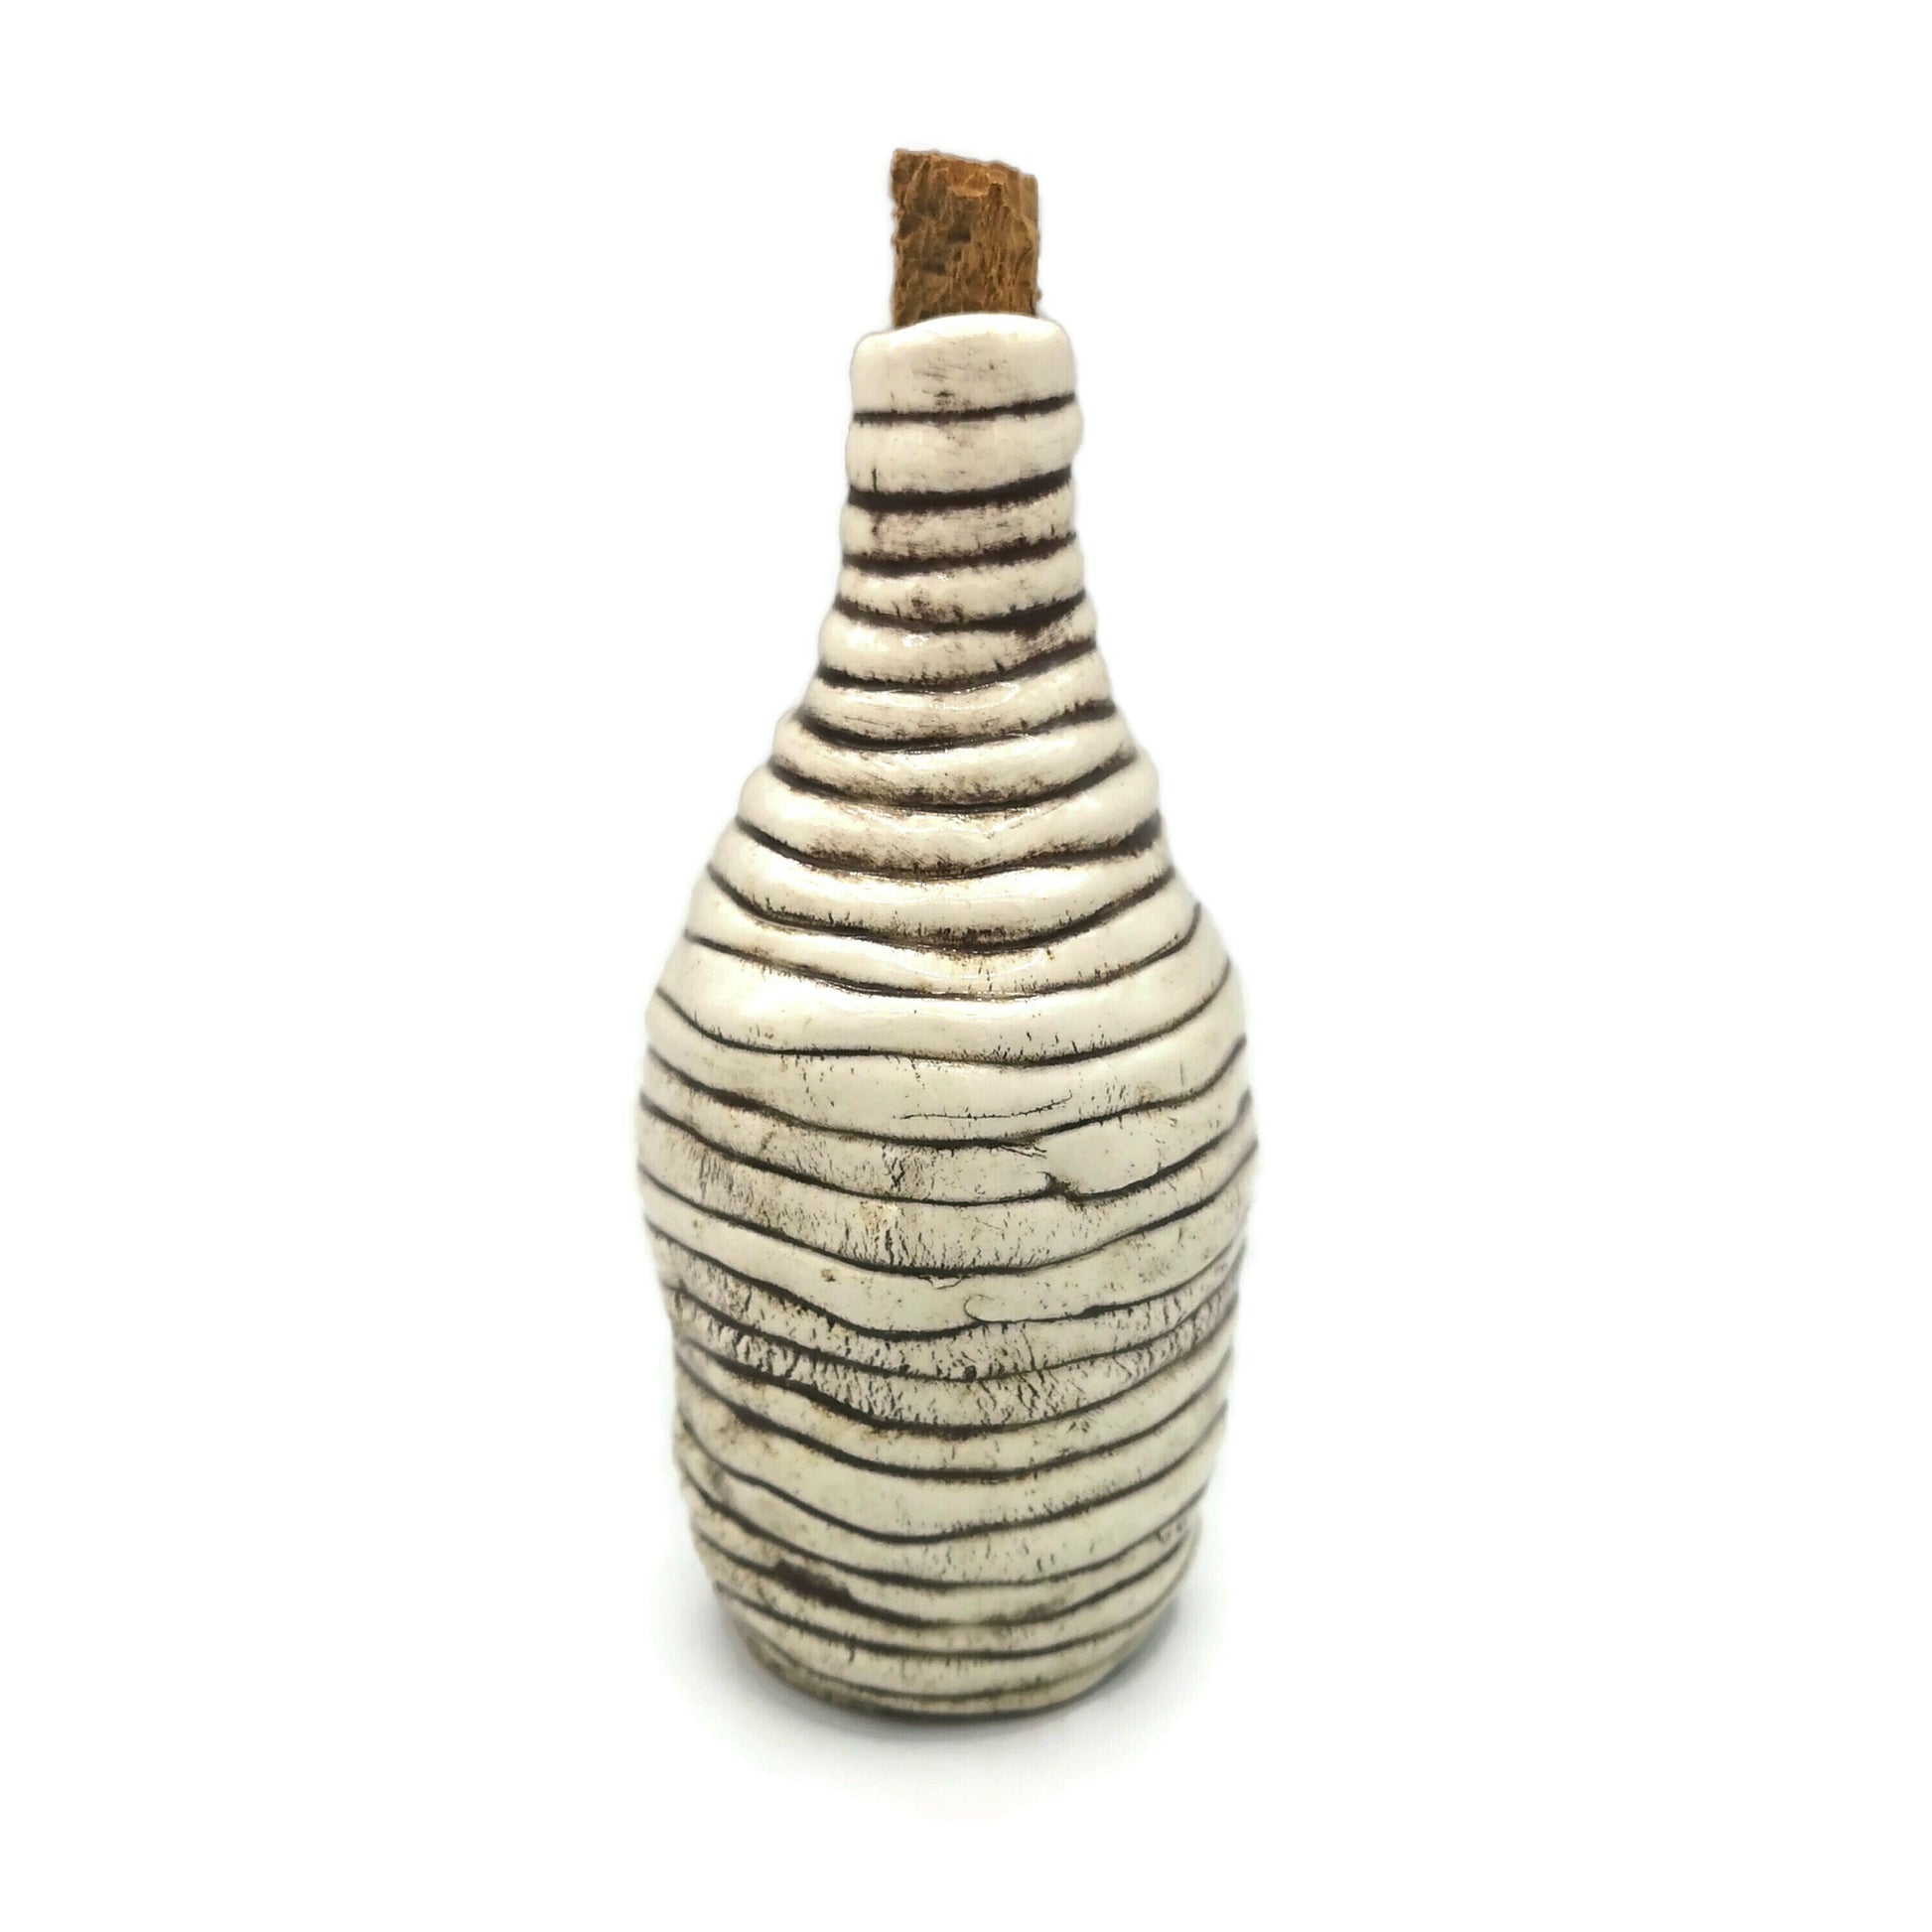 DECORATIVE BOTTLES, SMALL Ceramic Bottle With Cork, Host Gift, Housewarming Gift First Home - Ceramica Ana Rafael